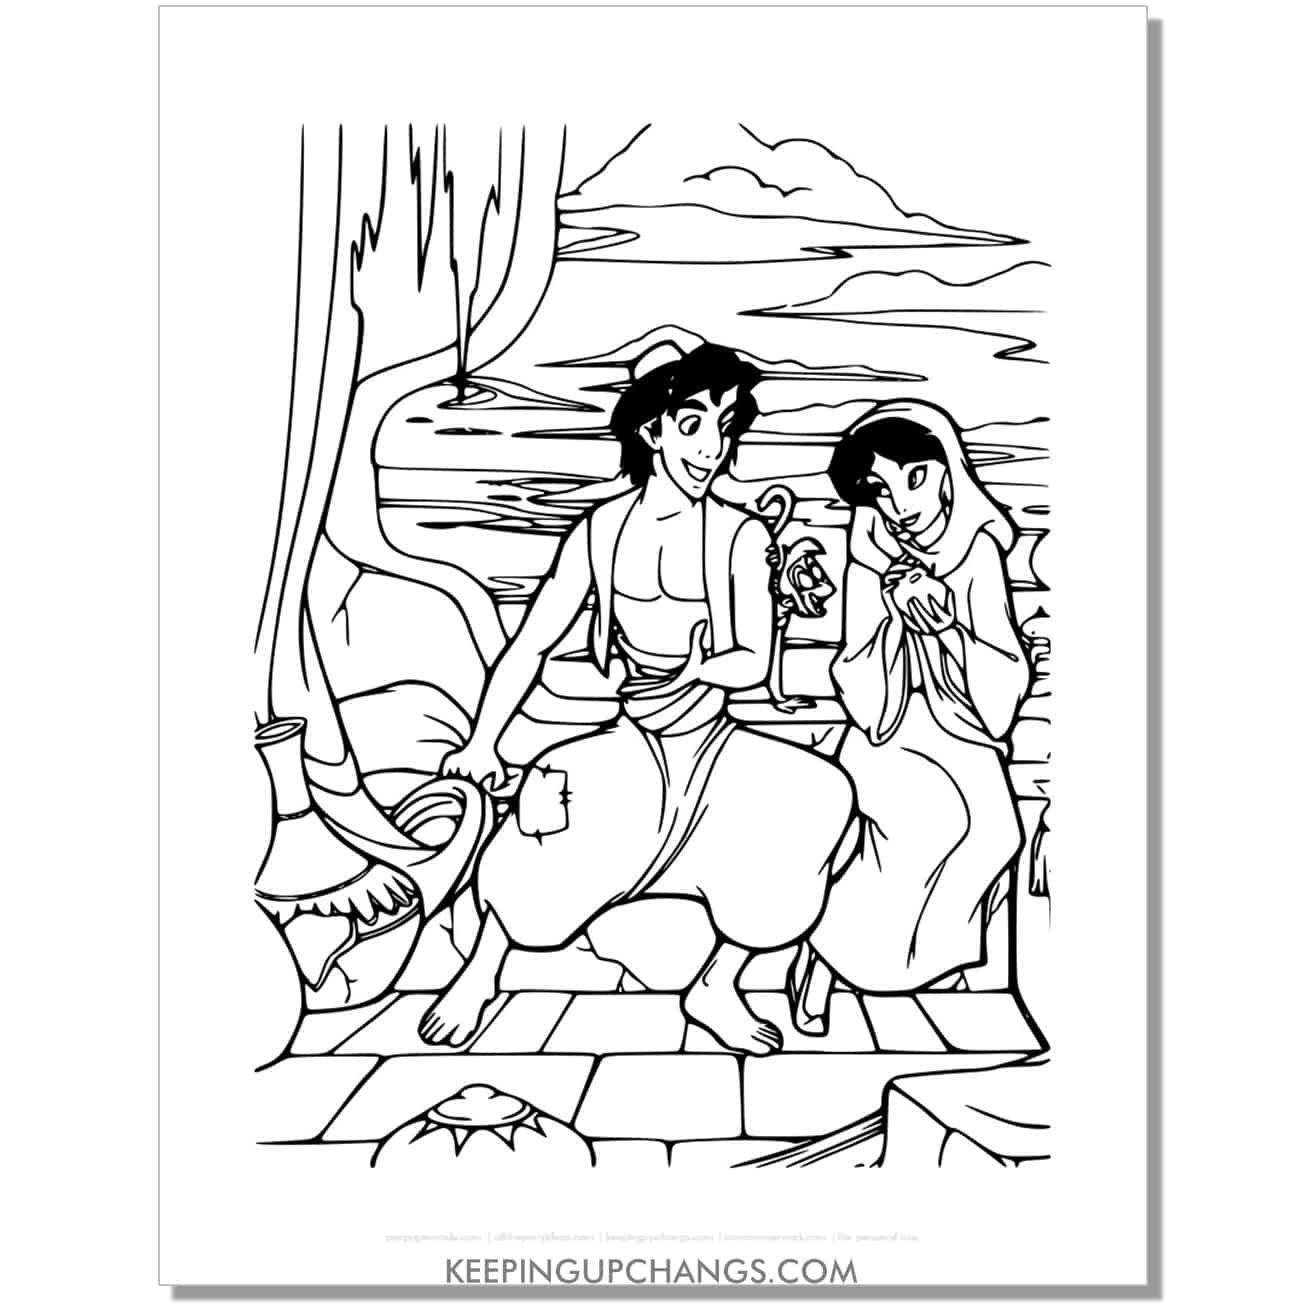 jasmine hanging out with aladdin as civilian coloring page, sheet.